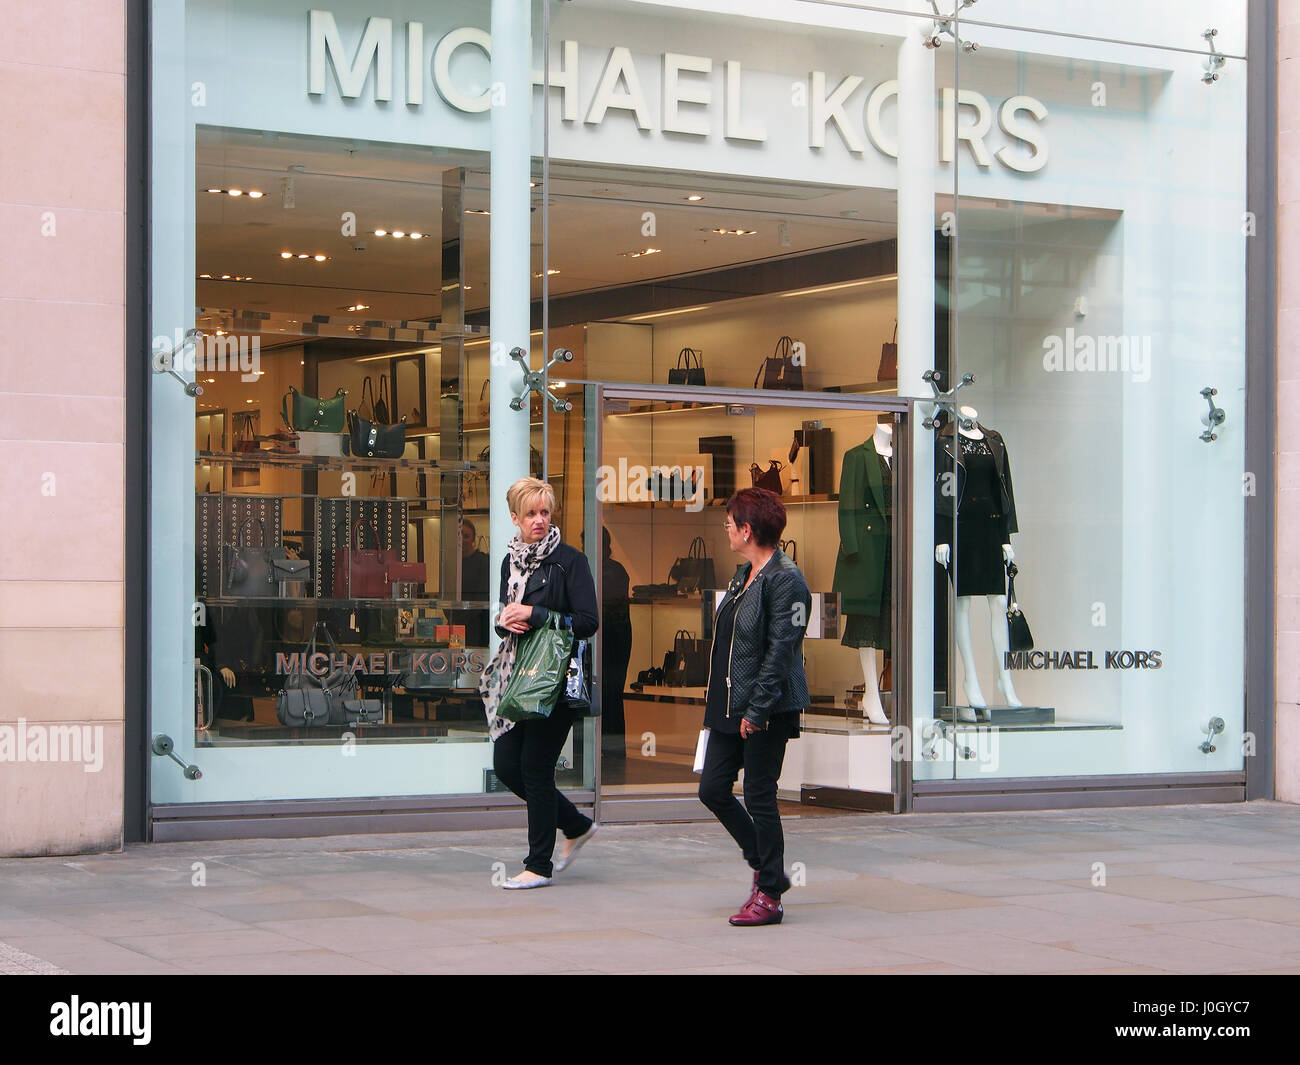 Fashionable Manchester shop shops Michael Kors in the city centre center showing the window display and two caucasian women in the foreground. Stock Photo